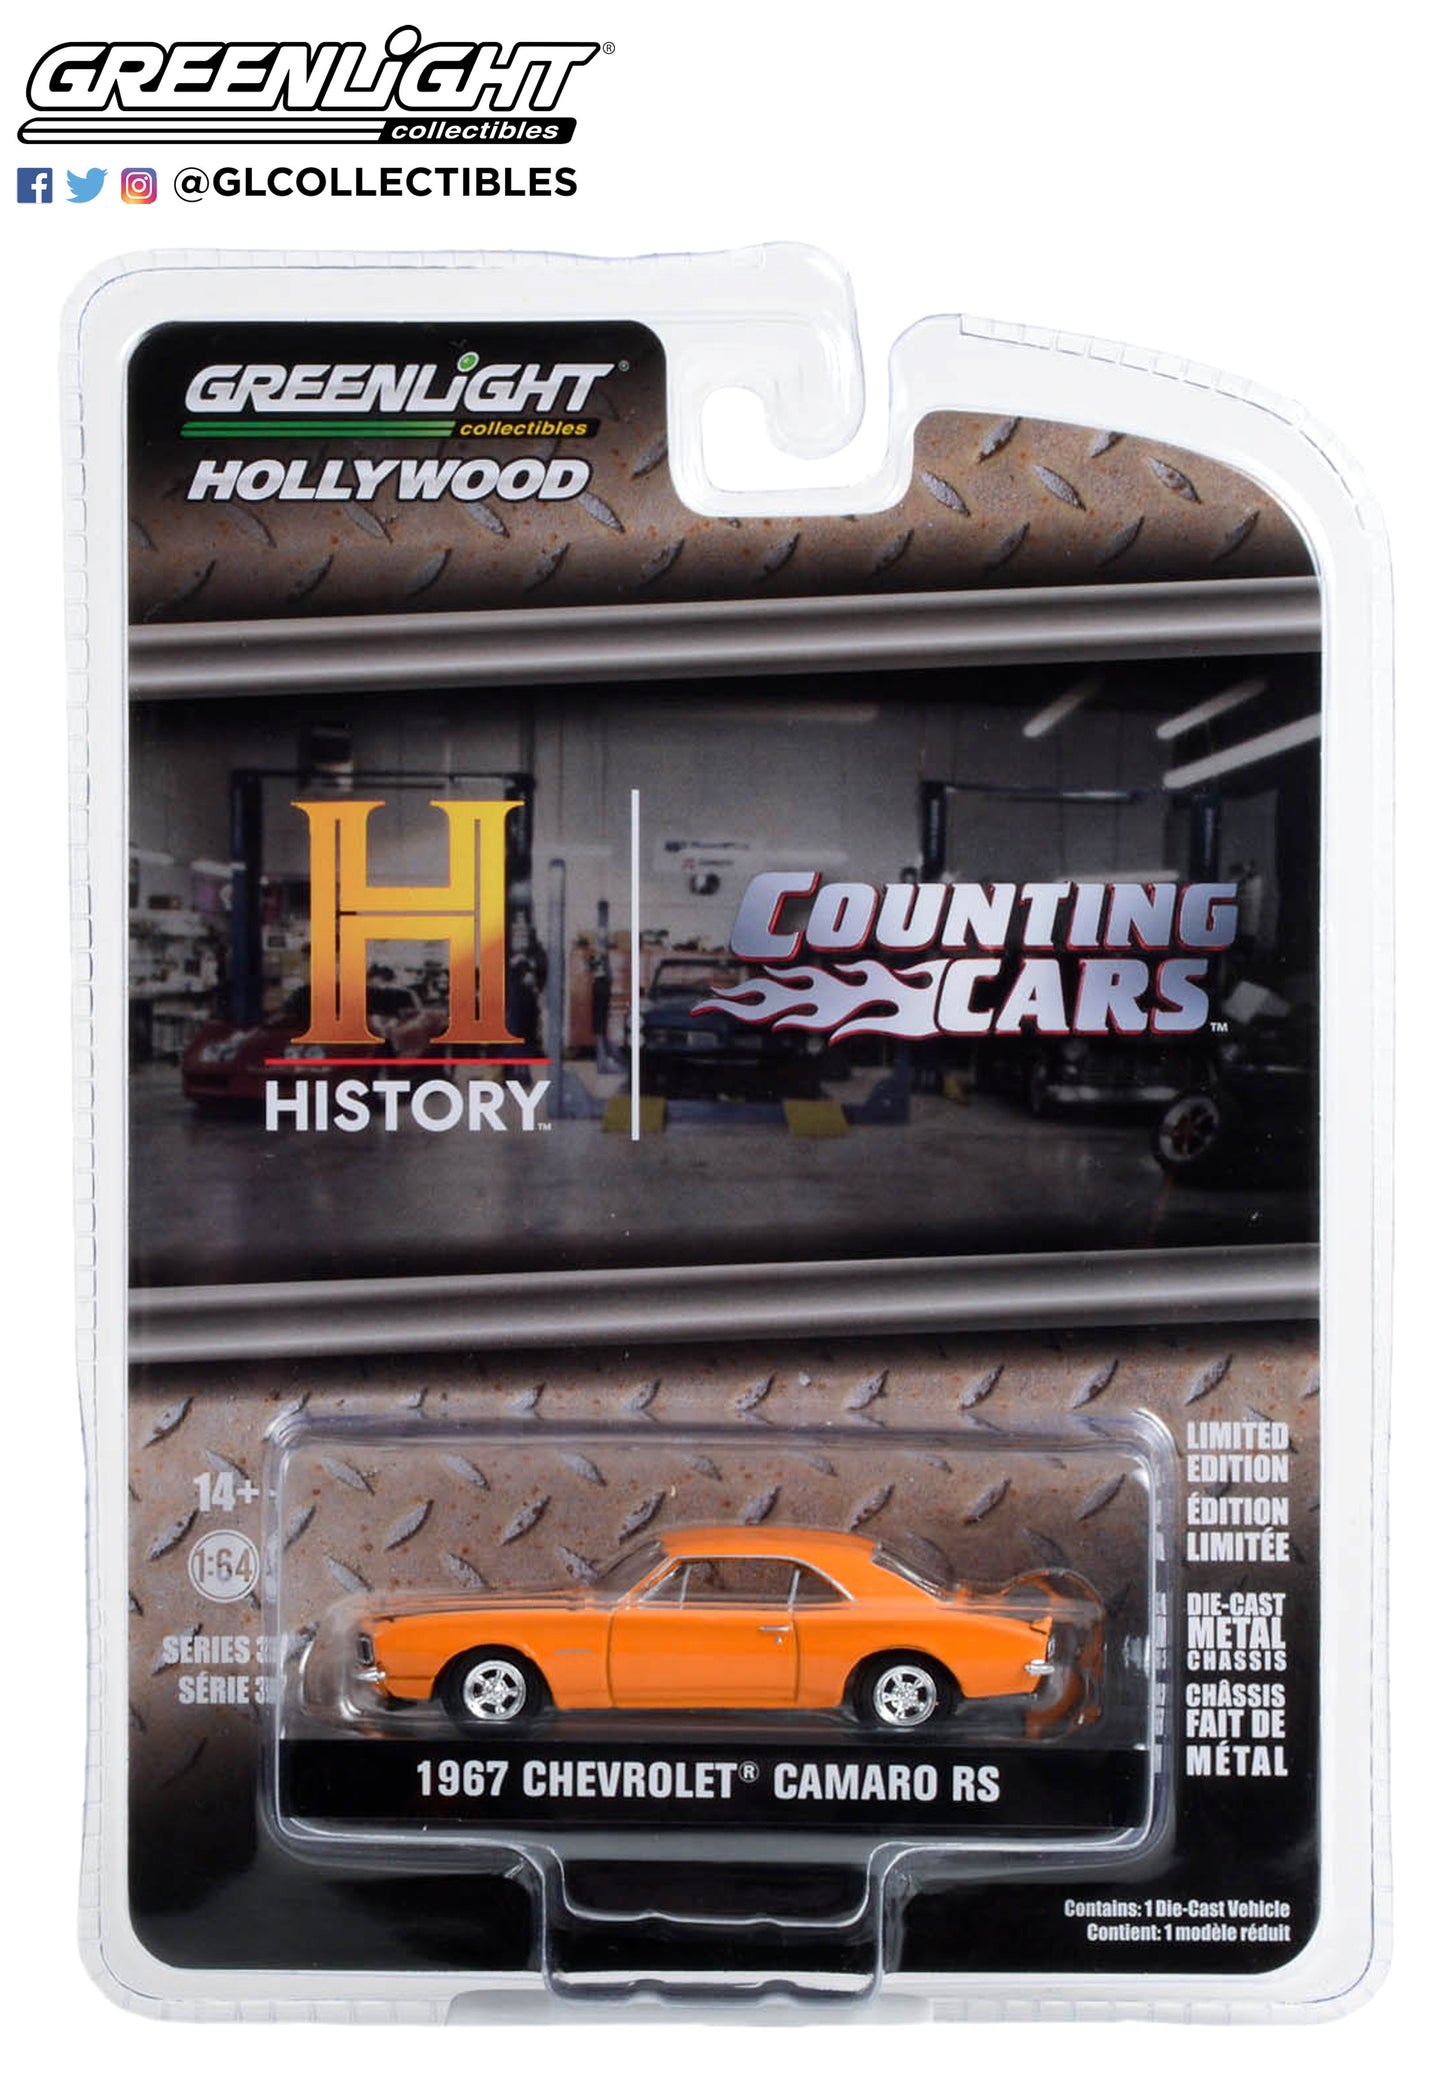 GreenLight 1:64 Hollywood Series 37 - Counting Cars (2012-Current TV Series) - 1967 Chevrolet Camaro RS 44970-F